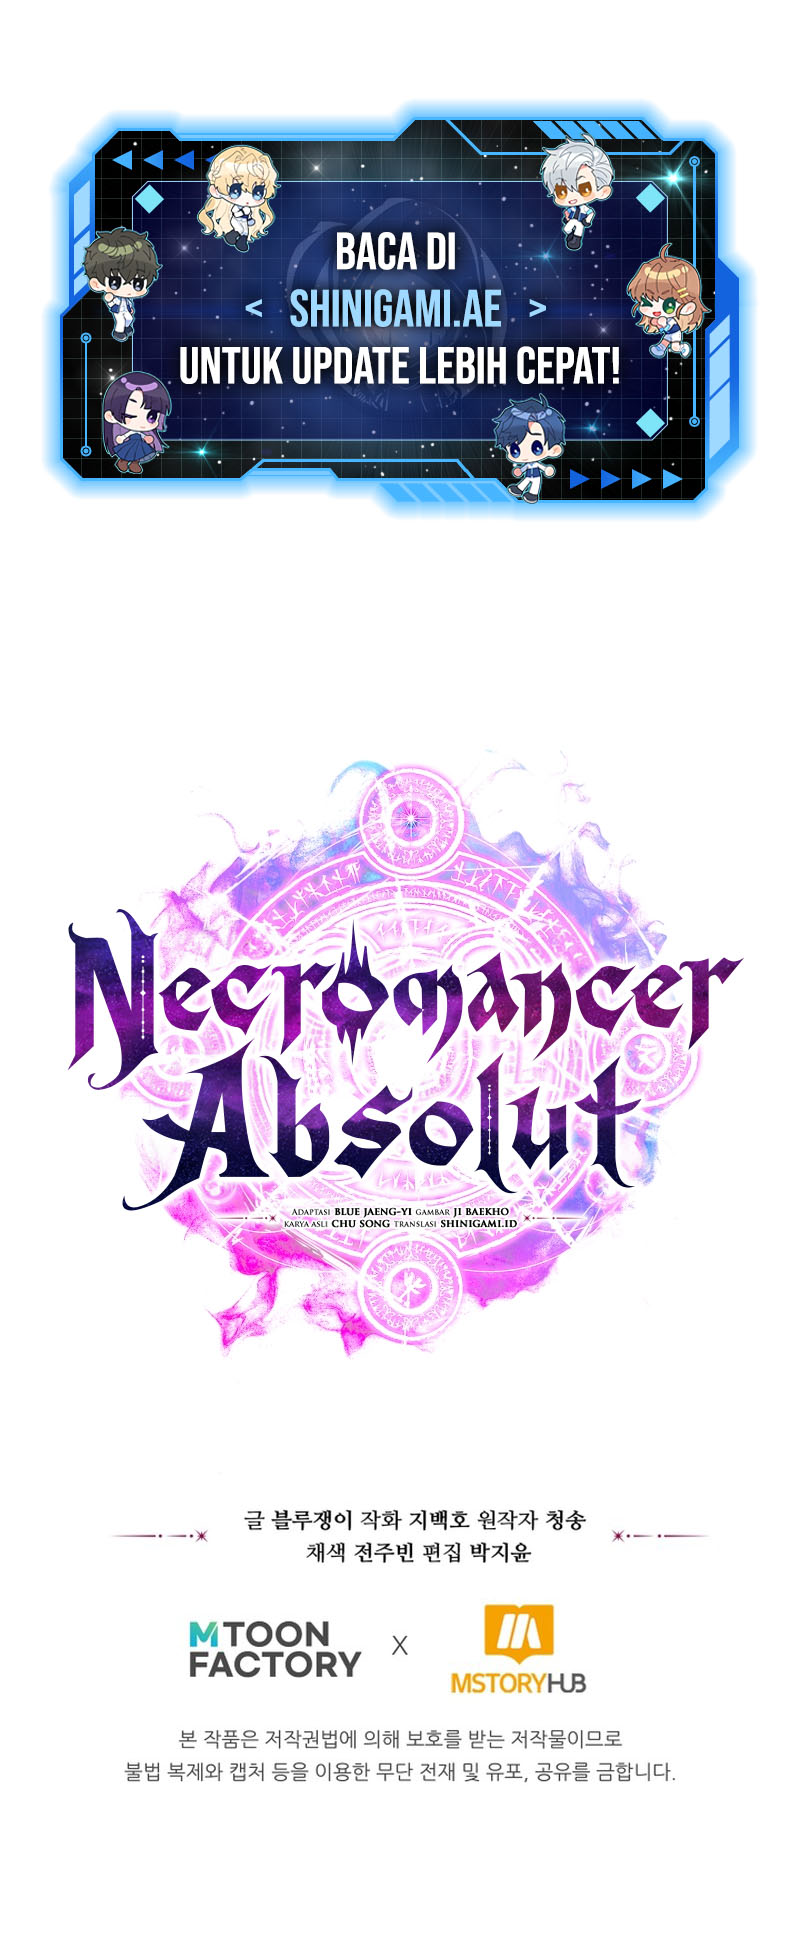 absolute-necromancer Chapter 38